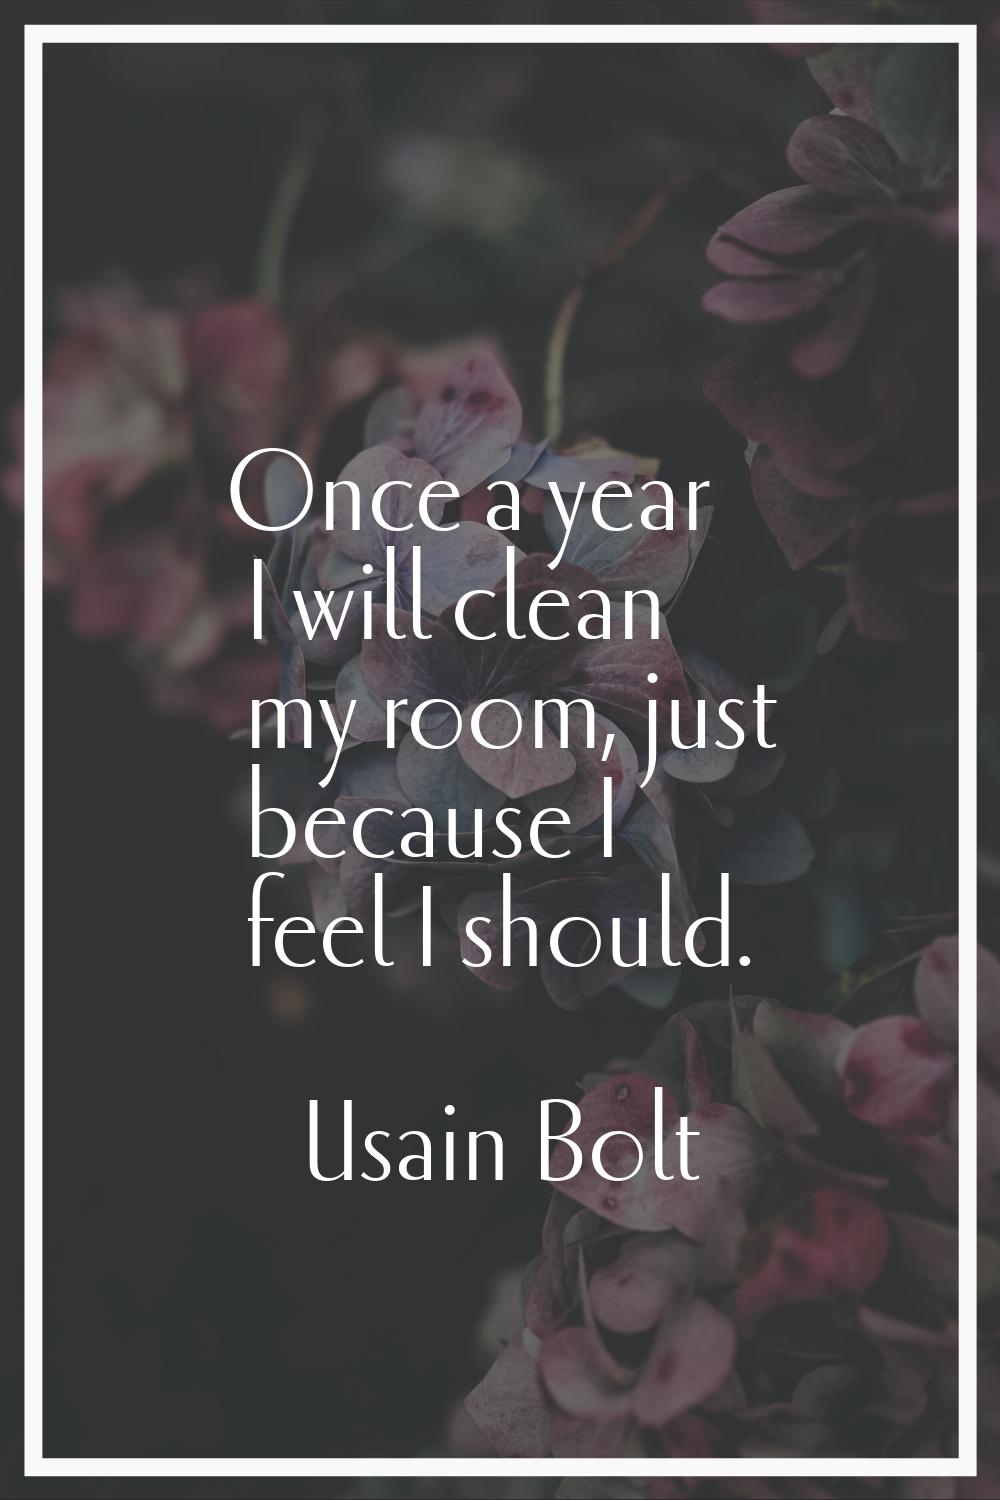 Once a year I will clean my room, just because I feel I should.